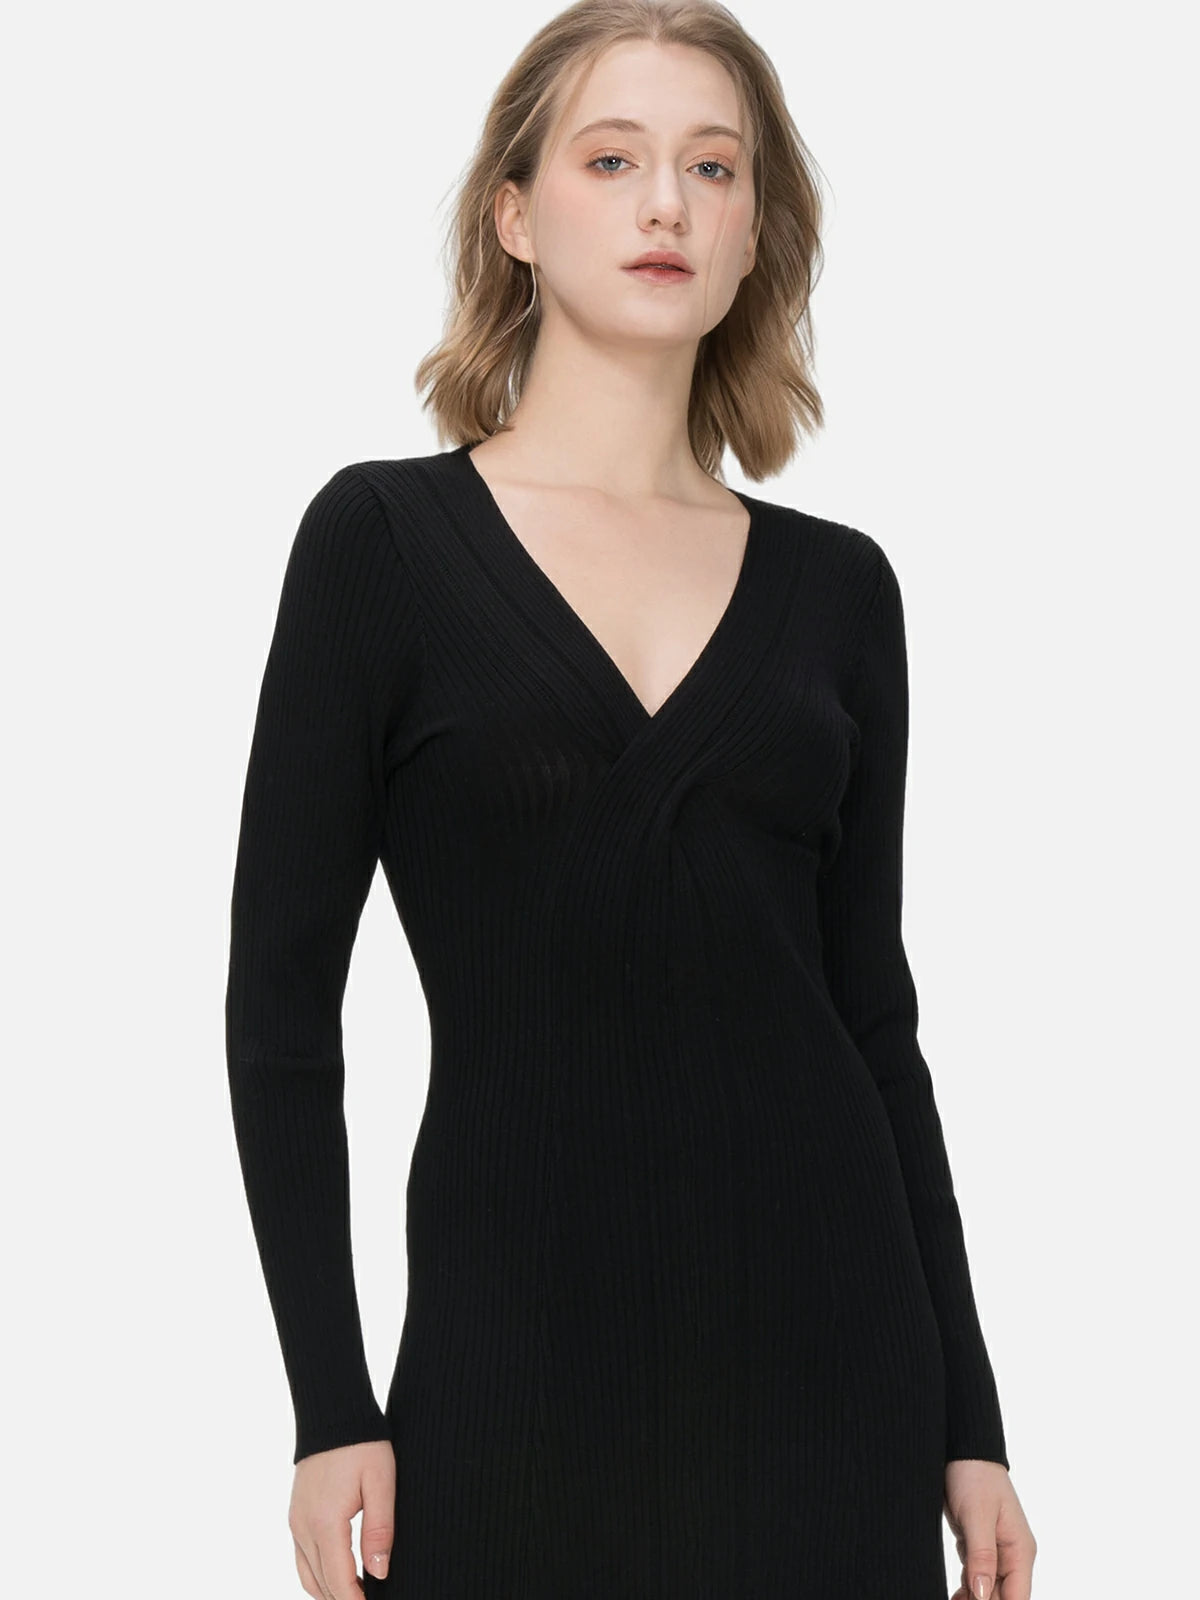 Elevate your style with this black knit midi dress featuring a cross V-neck design, body-hugging silhouette, and intricate knit details.